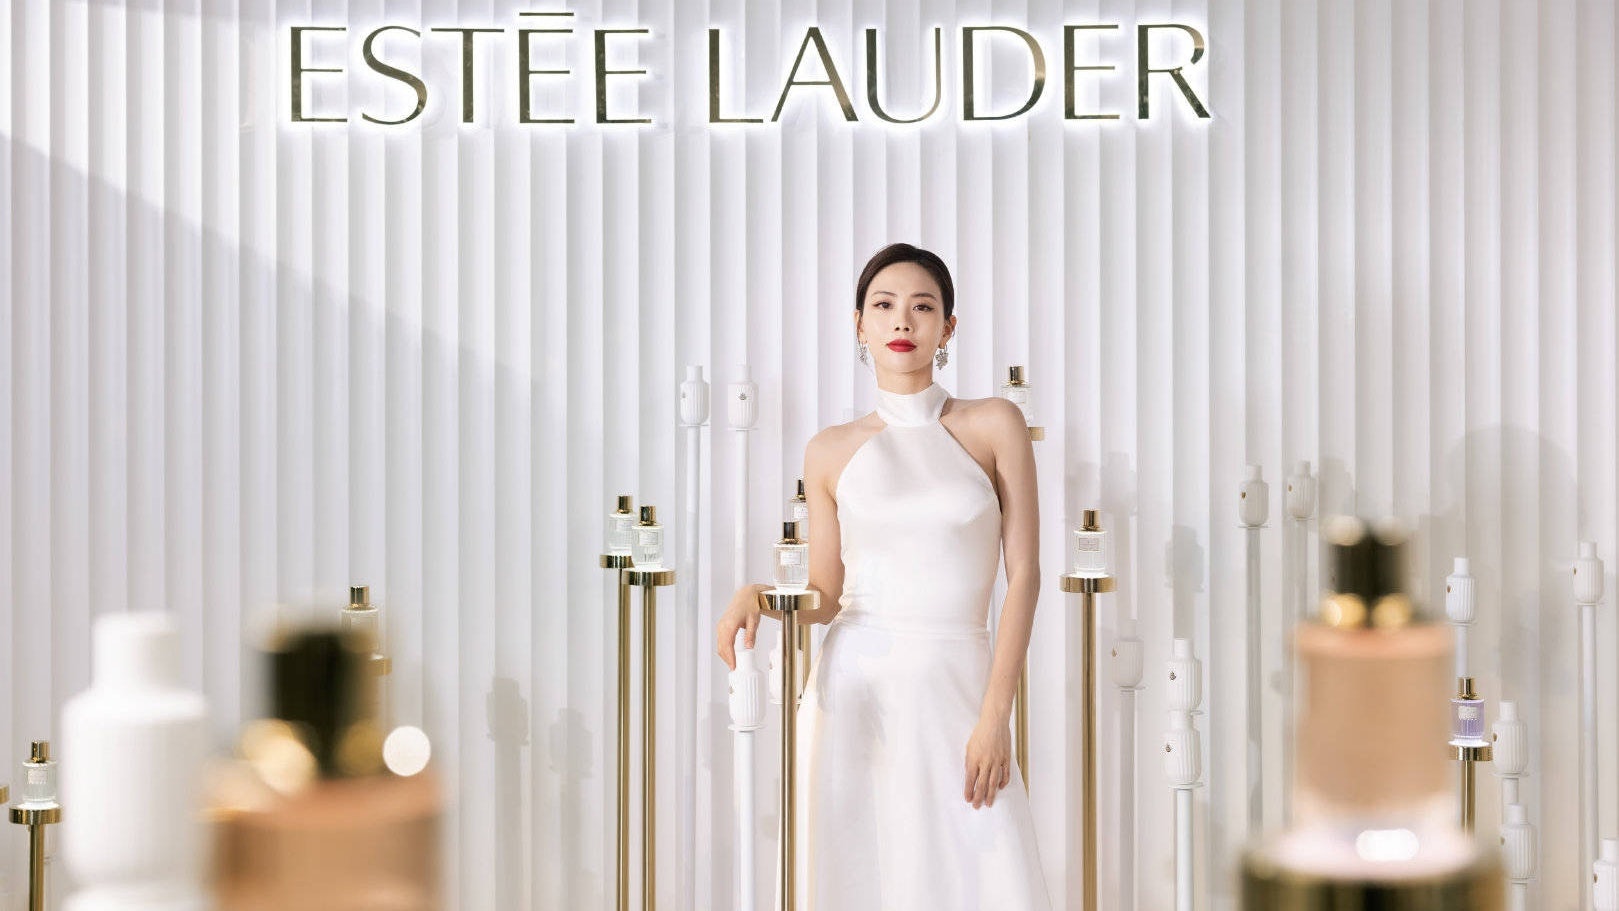 Chinese tech stocks face investor pushback despite a strong sales quarter. Meanwhile, for Estée Lauder, a bounce-back came from the West. Photo: Estée Lauder's Weibo